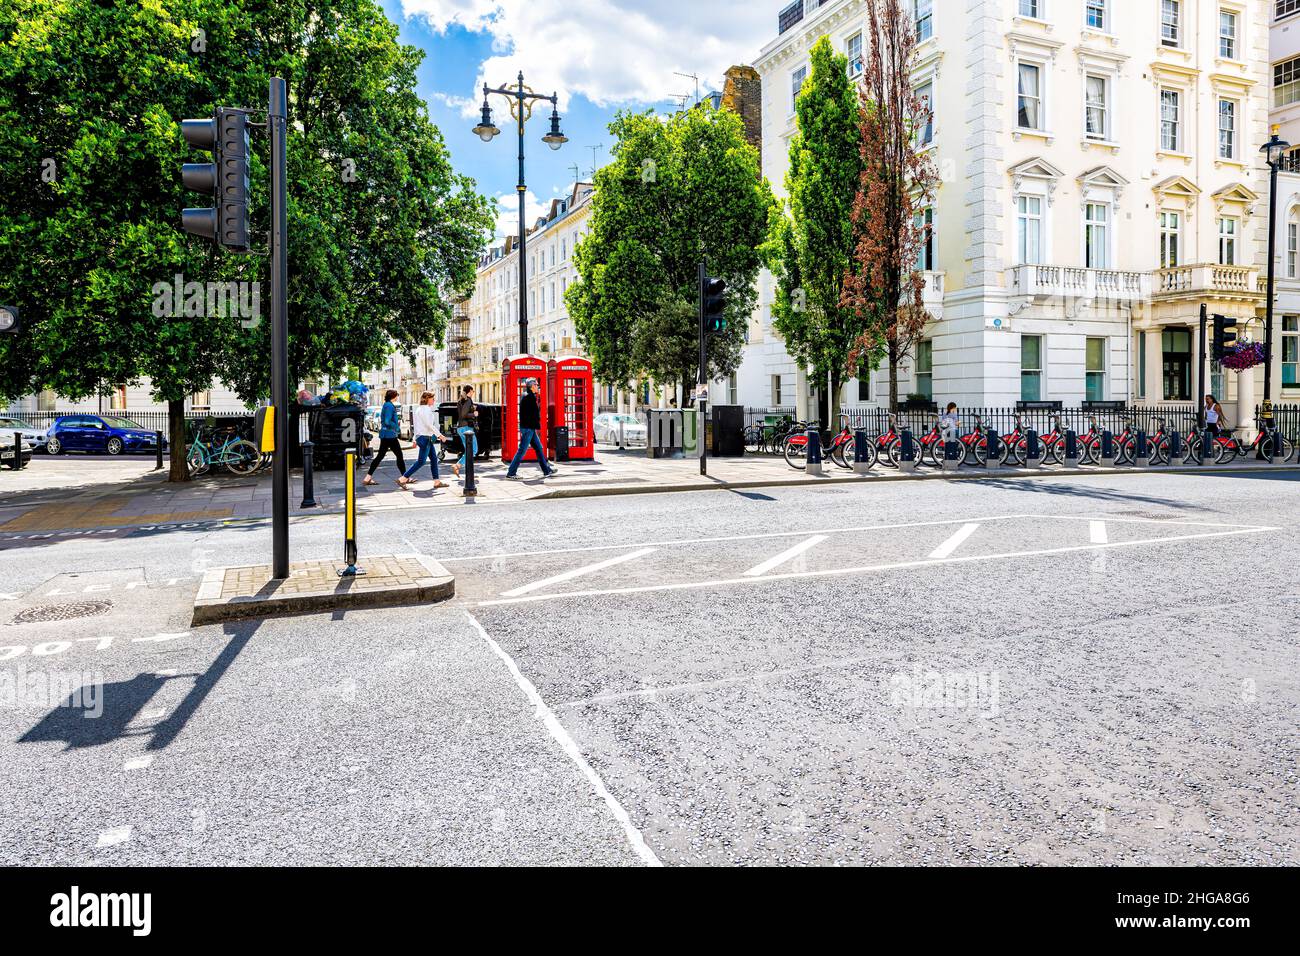 London, UK - June 21, 2018: Pimlico district neighborhood area street road with red telephone booths boxes and bikeshare rack of bicycles bikes by his Stock Photo